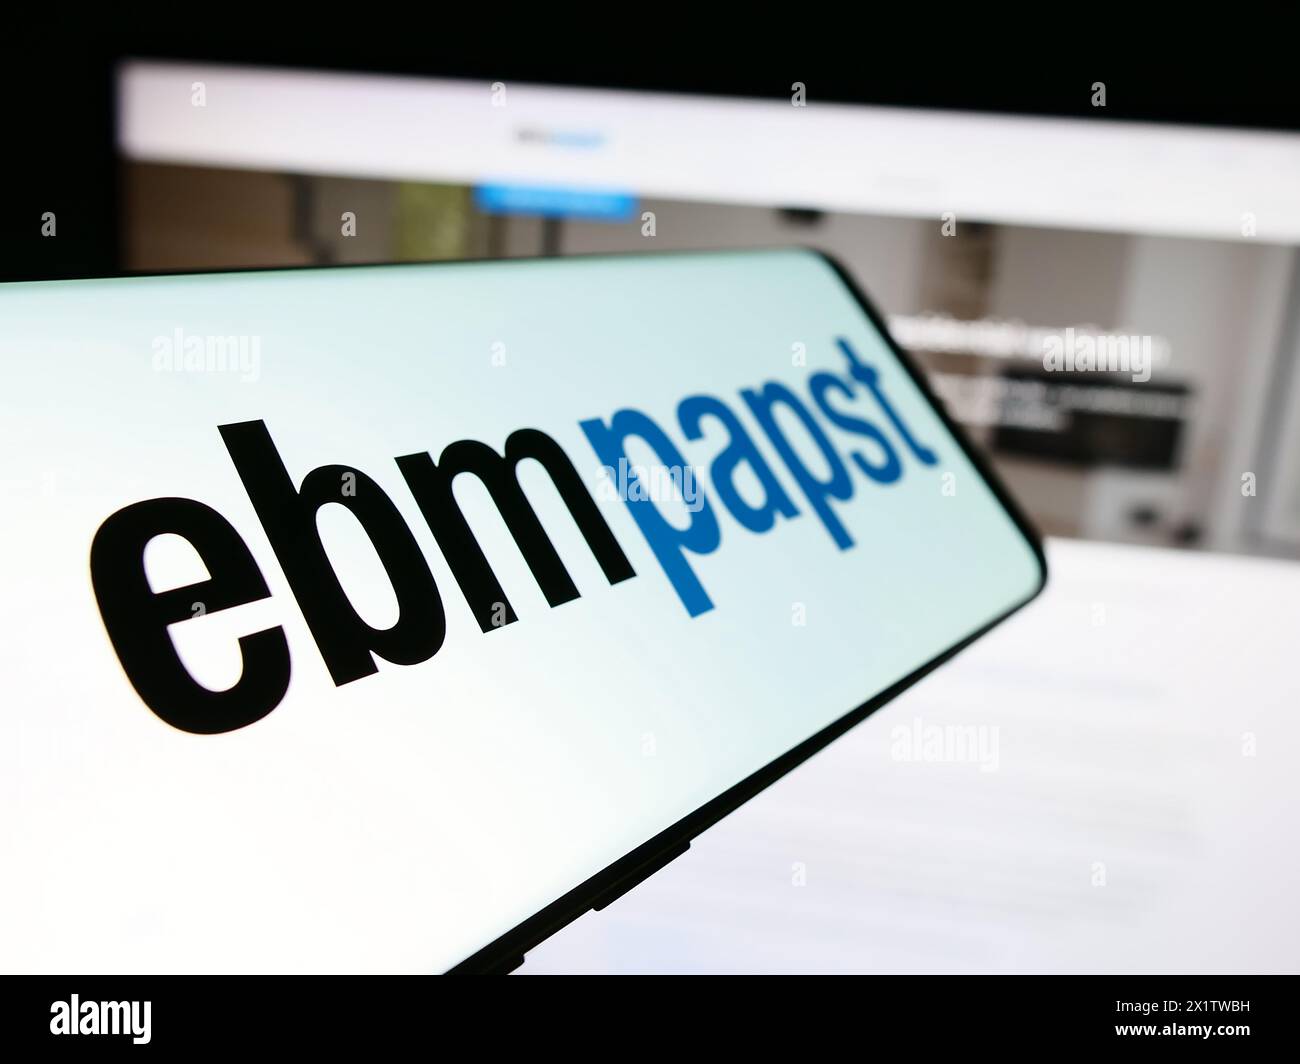 Mobile phone with logo of German electric motor company EBM-Papst Gruppe in front of business website. Focus on left of phone display. Stock Photo